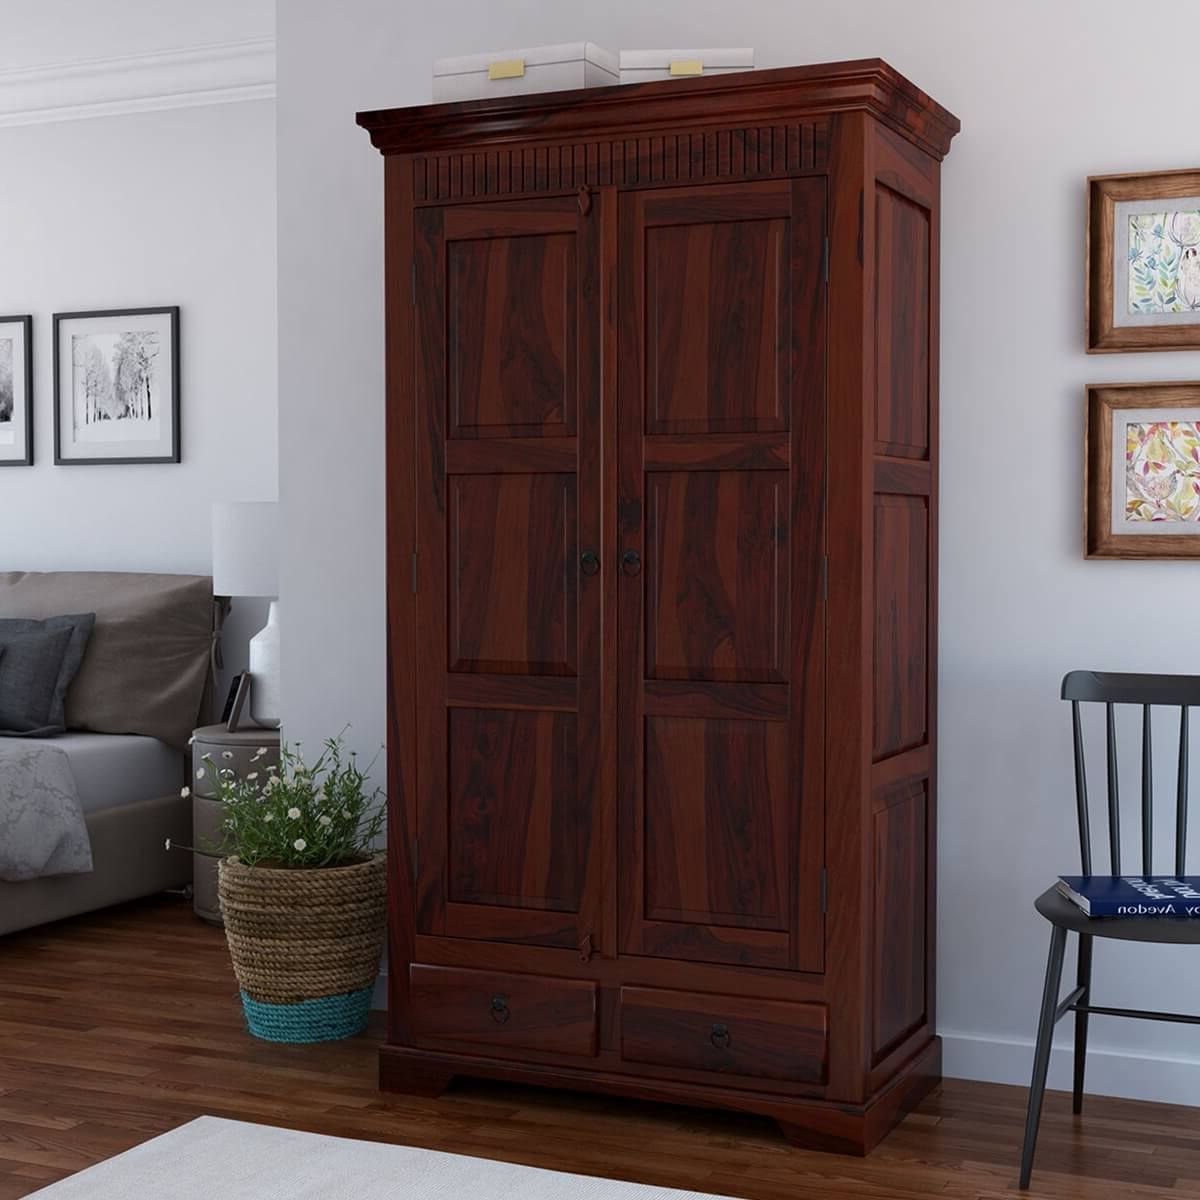 Marengo Rustic Solid Wood Large Wardrobe Armoire W Shelves And Drawers Intended For Large Wooden Wardrobes (View 16 of 20)